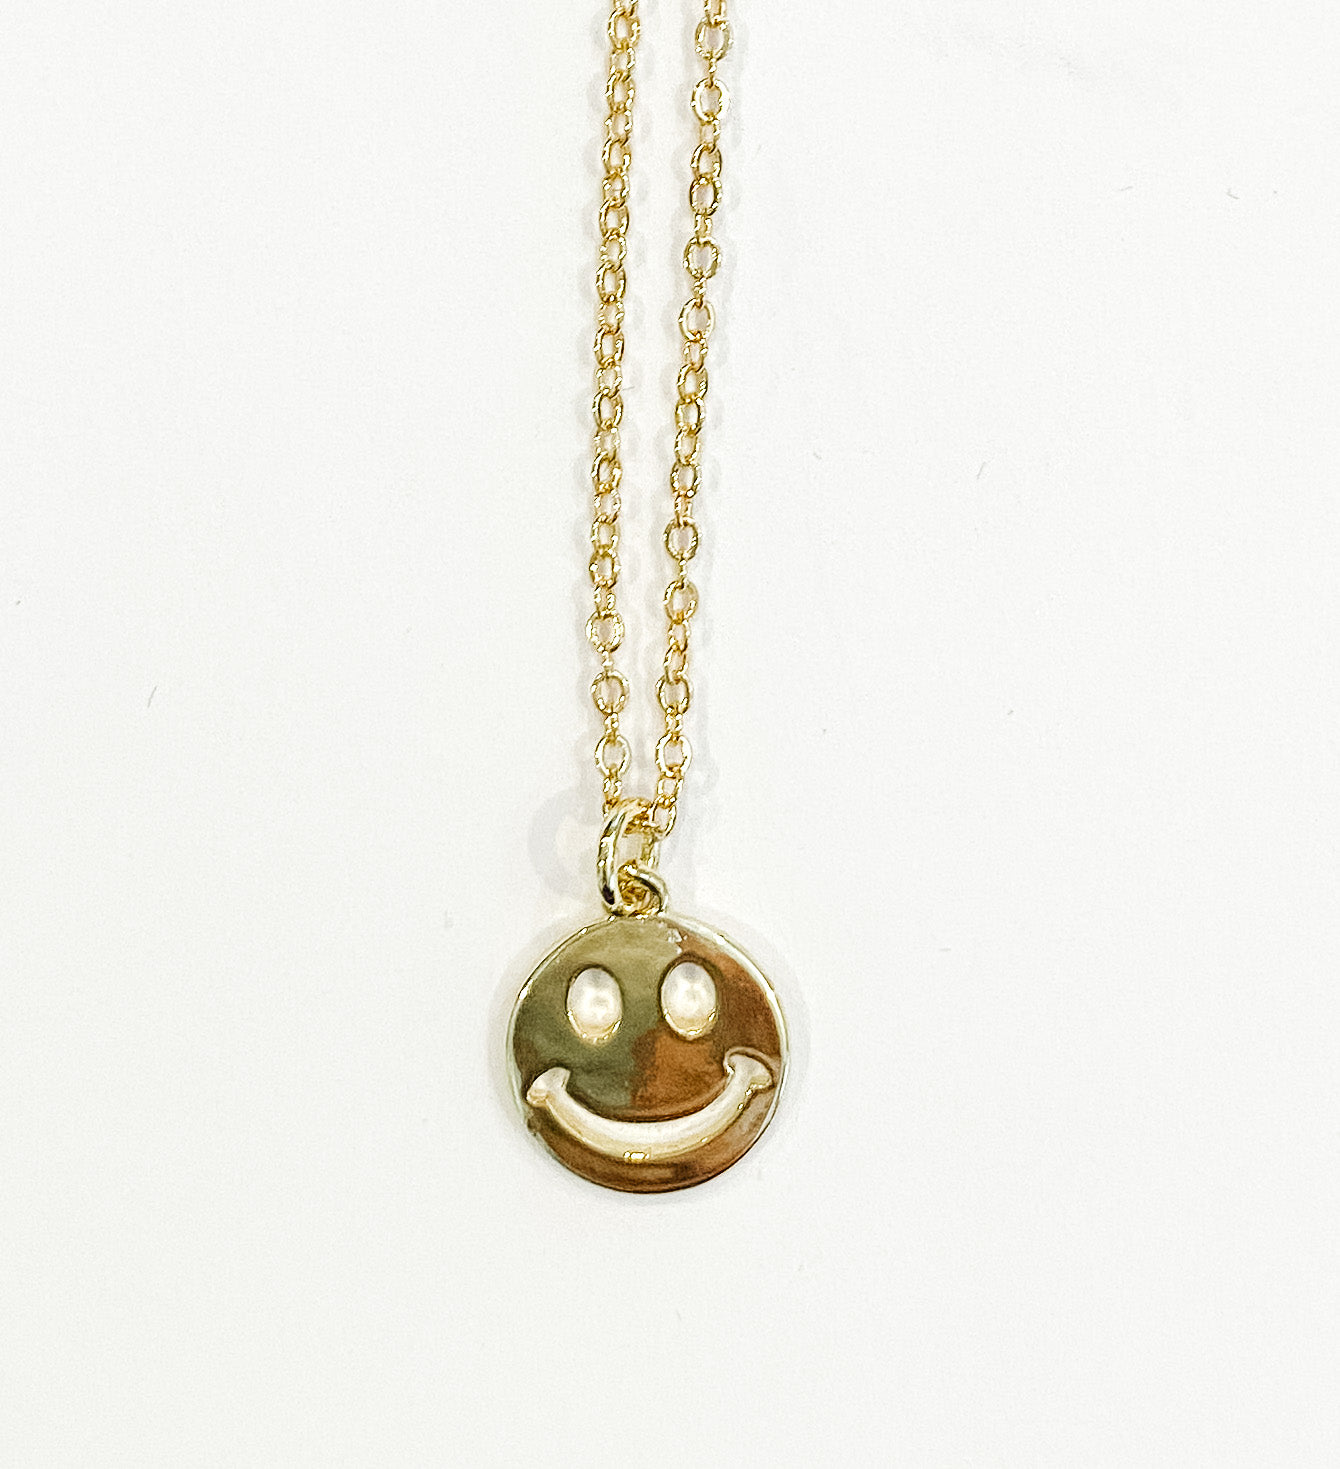 Smiley Face Necklace 3.0